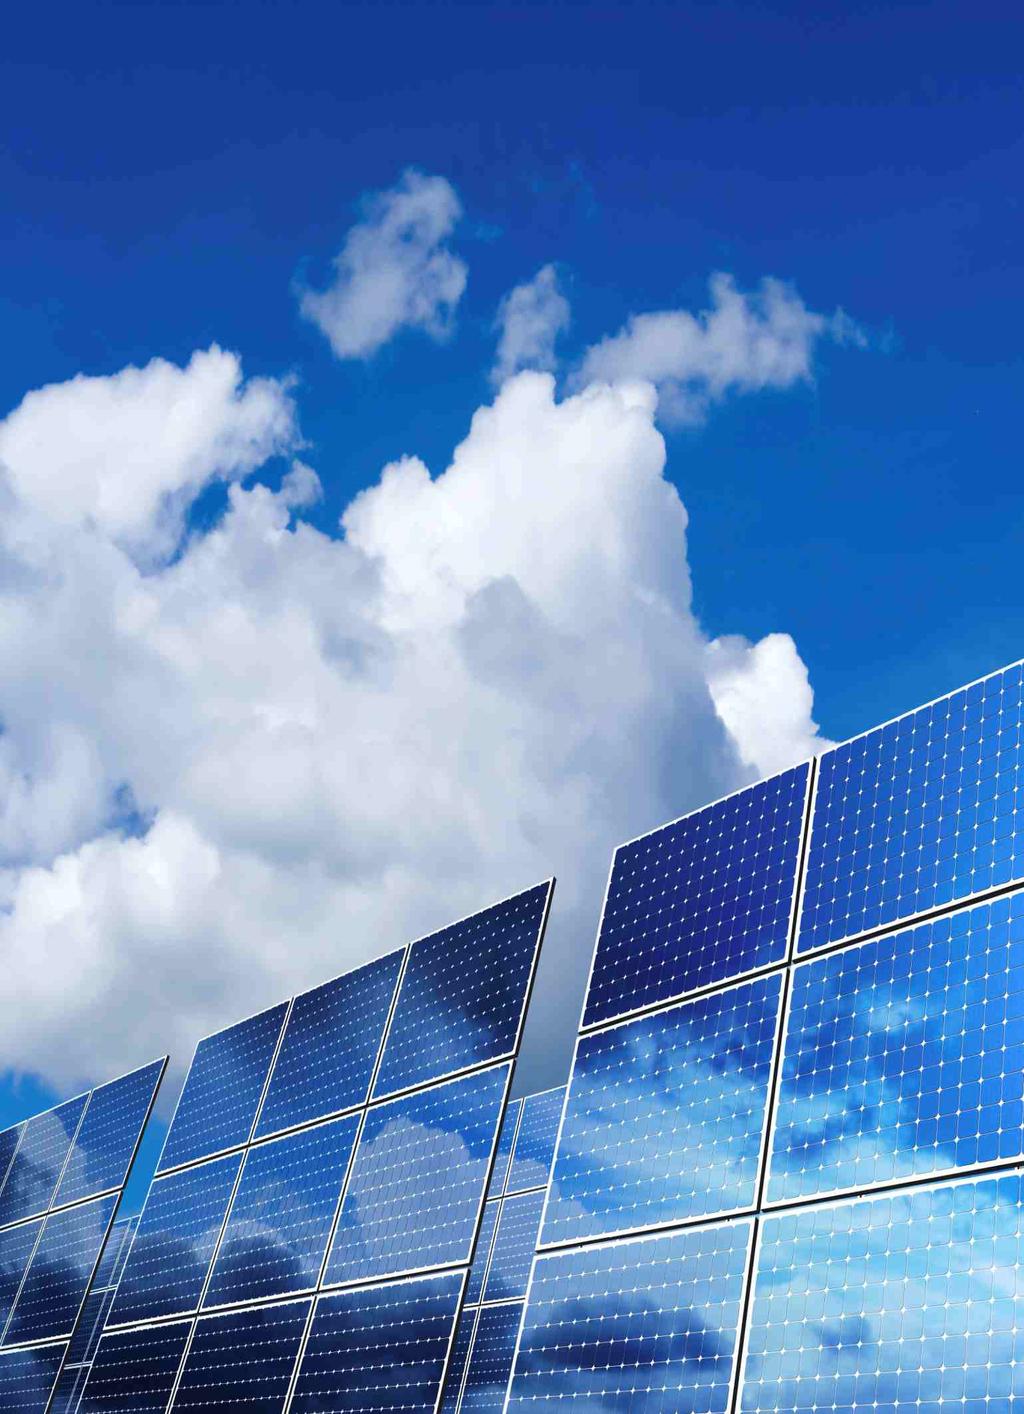 About Suntellite Group ONE-STOP SOLUTION Suntellite Group is specialized in R&D, manufacture, marketing, and sales of PV products.